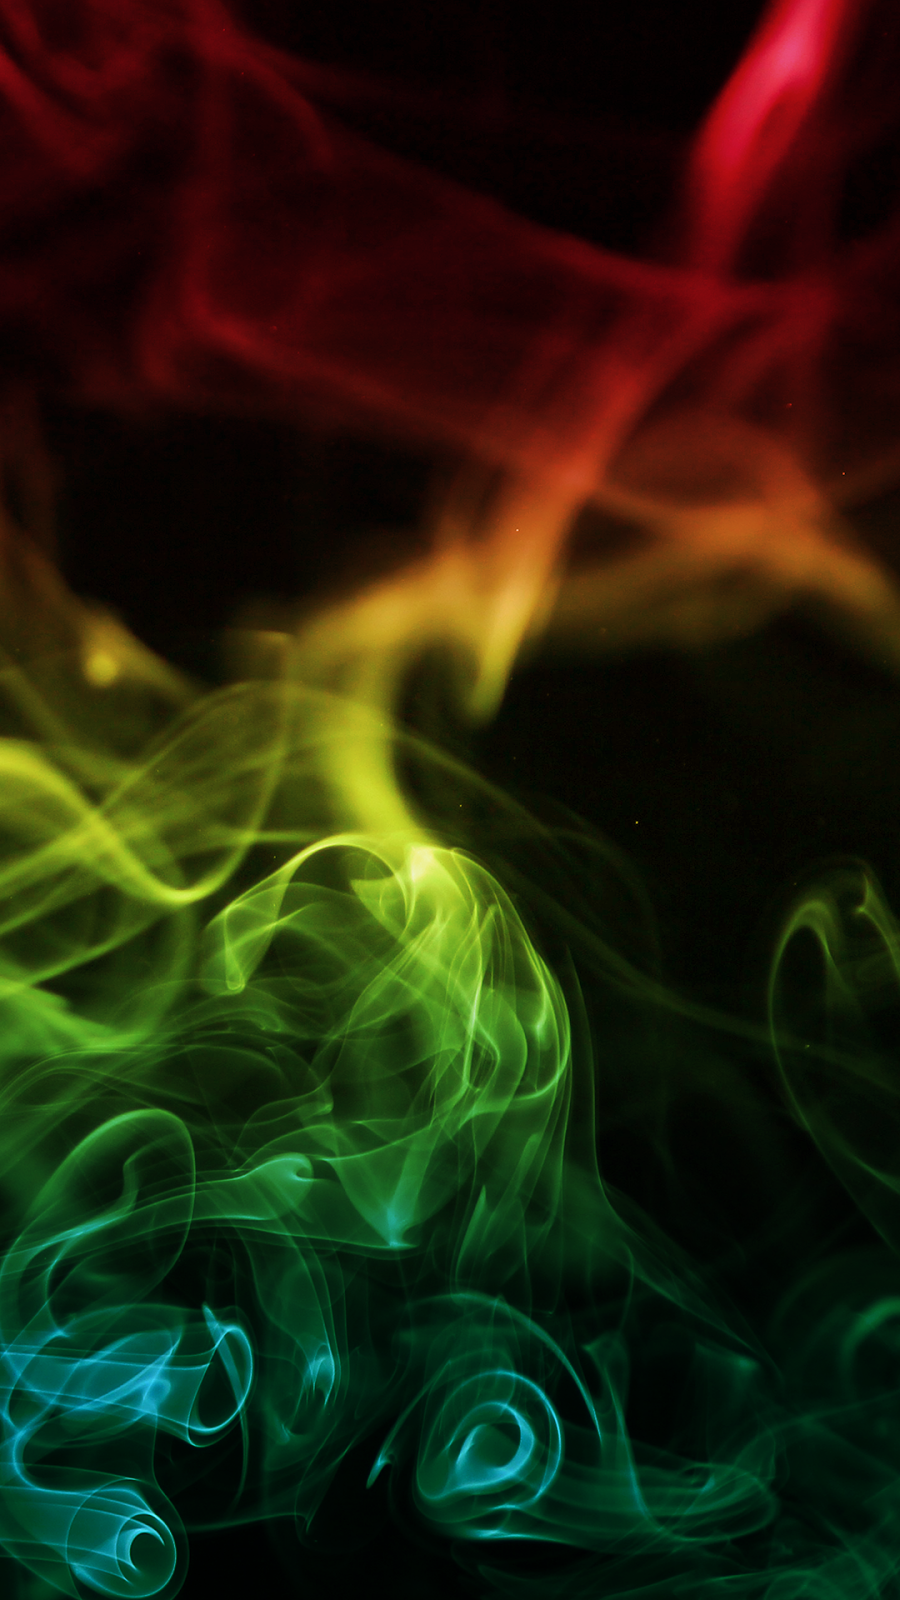 Smoke HD Wallpaper For Mobile Wallpapers For Mobile Phones